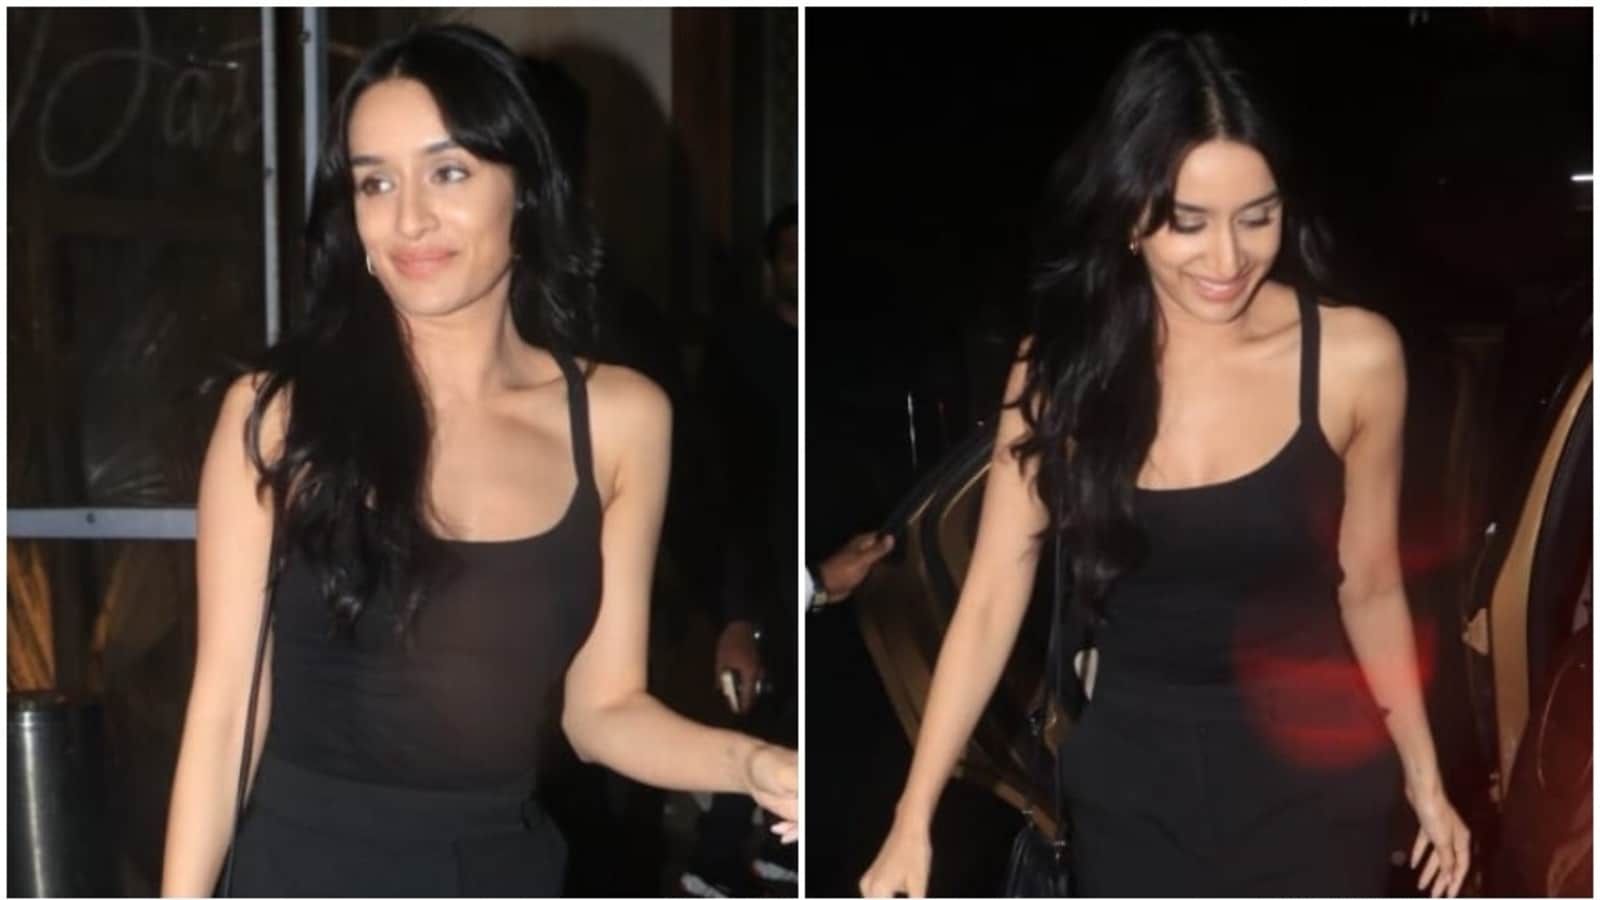 Xx Video With Shradha Kapoor - Shraddha Kapoor in black tank top and satin pants pulls off effortless  girl-next-door look: See pics and video | Fashion Trends - Hindustan Times